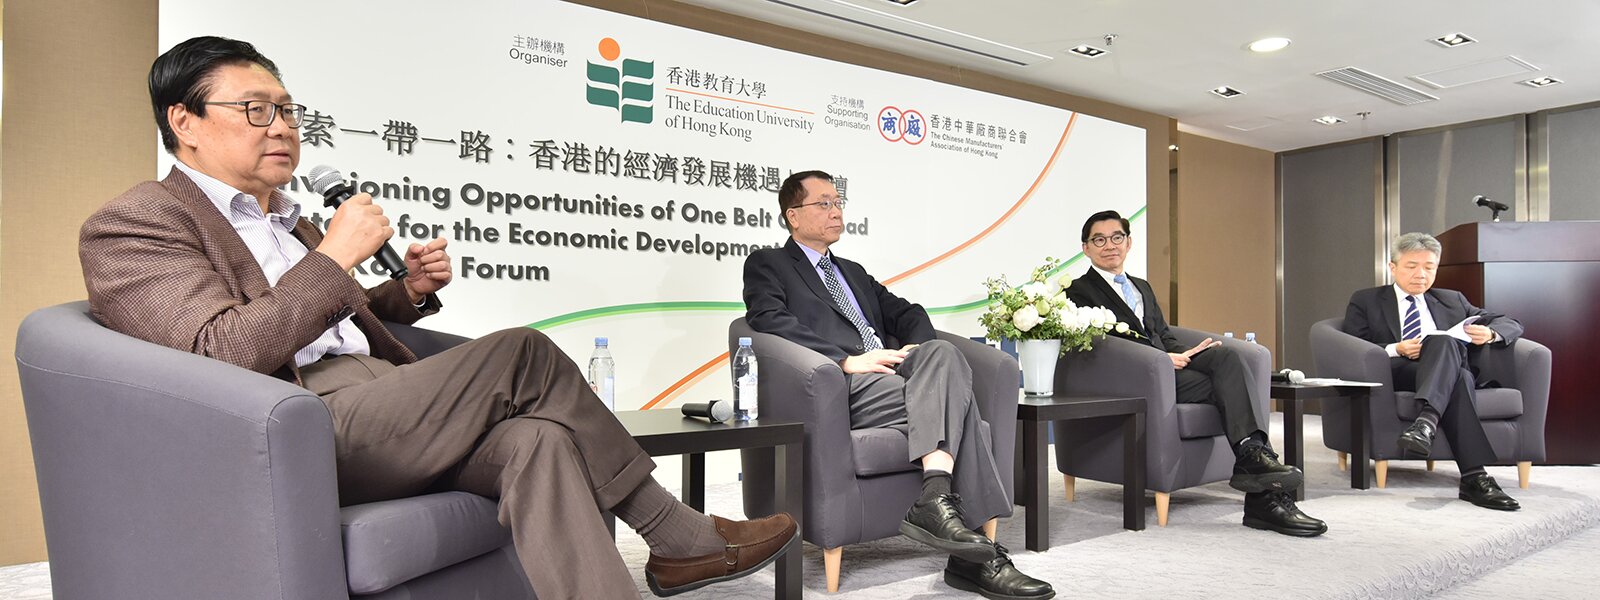 “Envisioning Opportunities from the One Belt, One Road Strategy for the Economic Development of Hong Kong” Forum